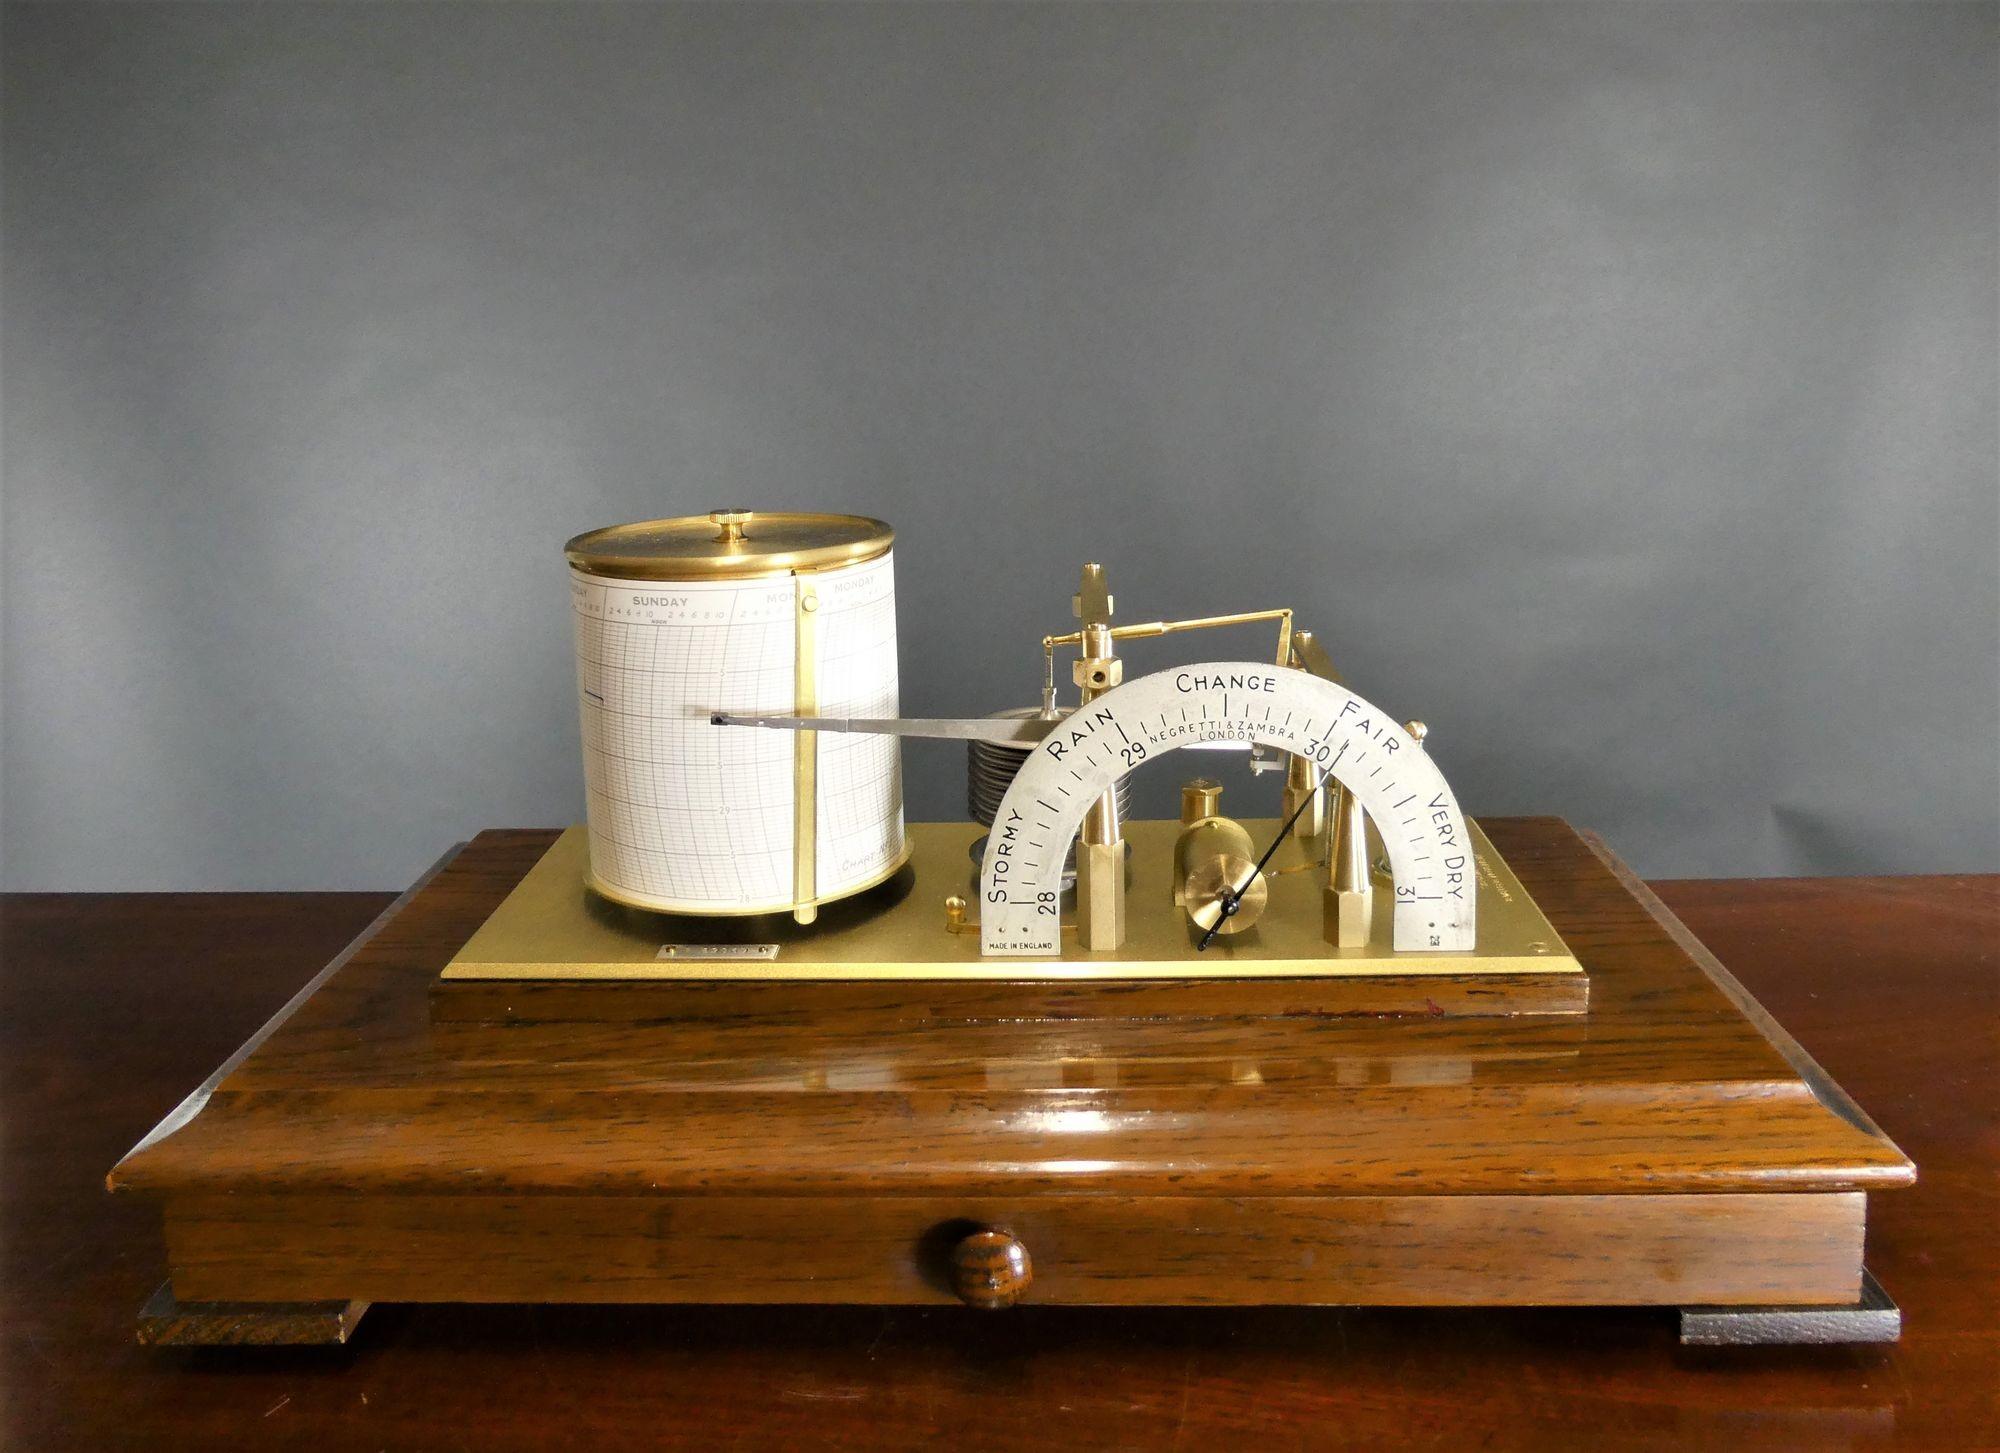 Edwardian polished oak cased barograph with bevelled glass panels.
Brass base plate stamped ‘Regent, Jewelled movement supporting the ten vacuum chambers linking the ink pen pointer to the revolving clockwork drum and to the silvered barometer dial.